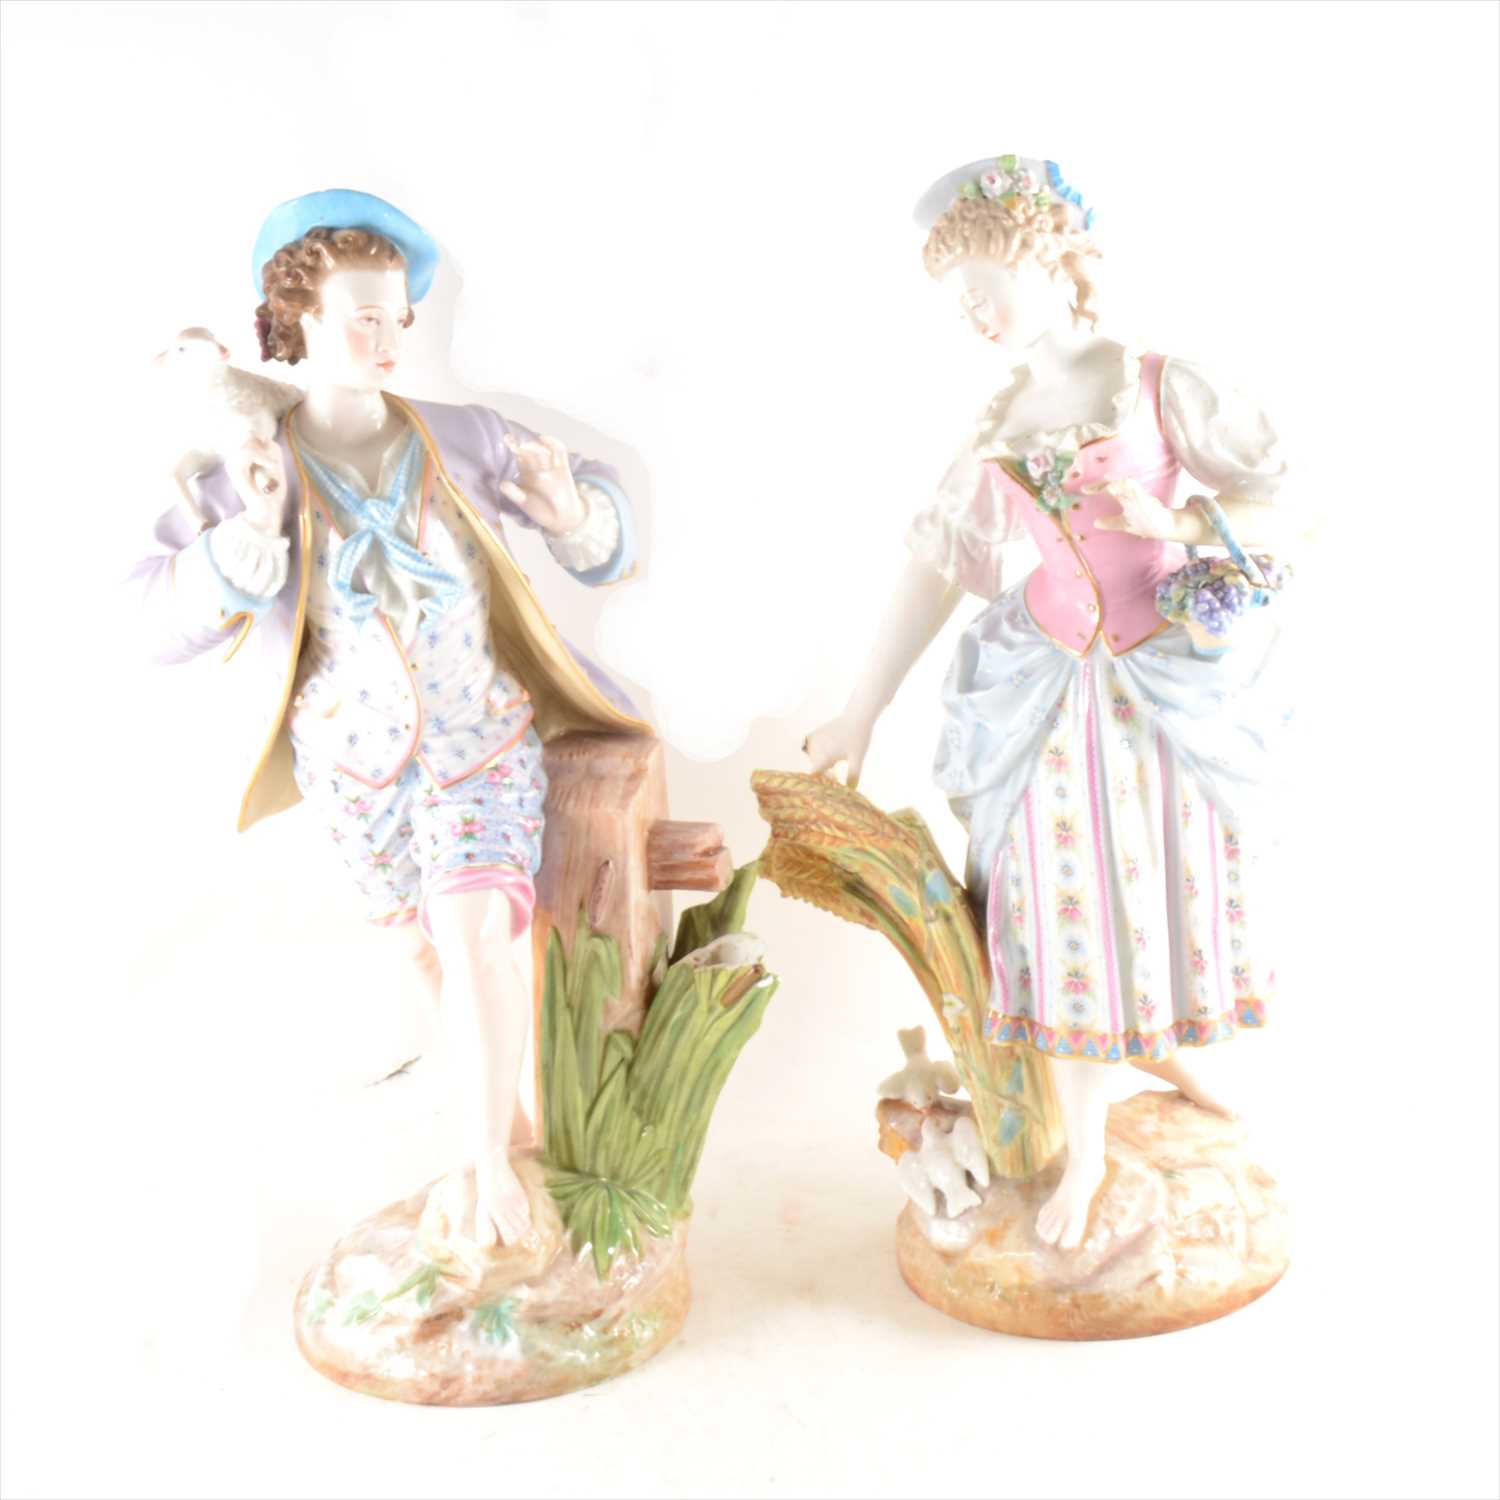 Lot 8 - Pair of German porcelain figures of a shepherd boy and country girl (damaged), 43cm.